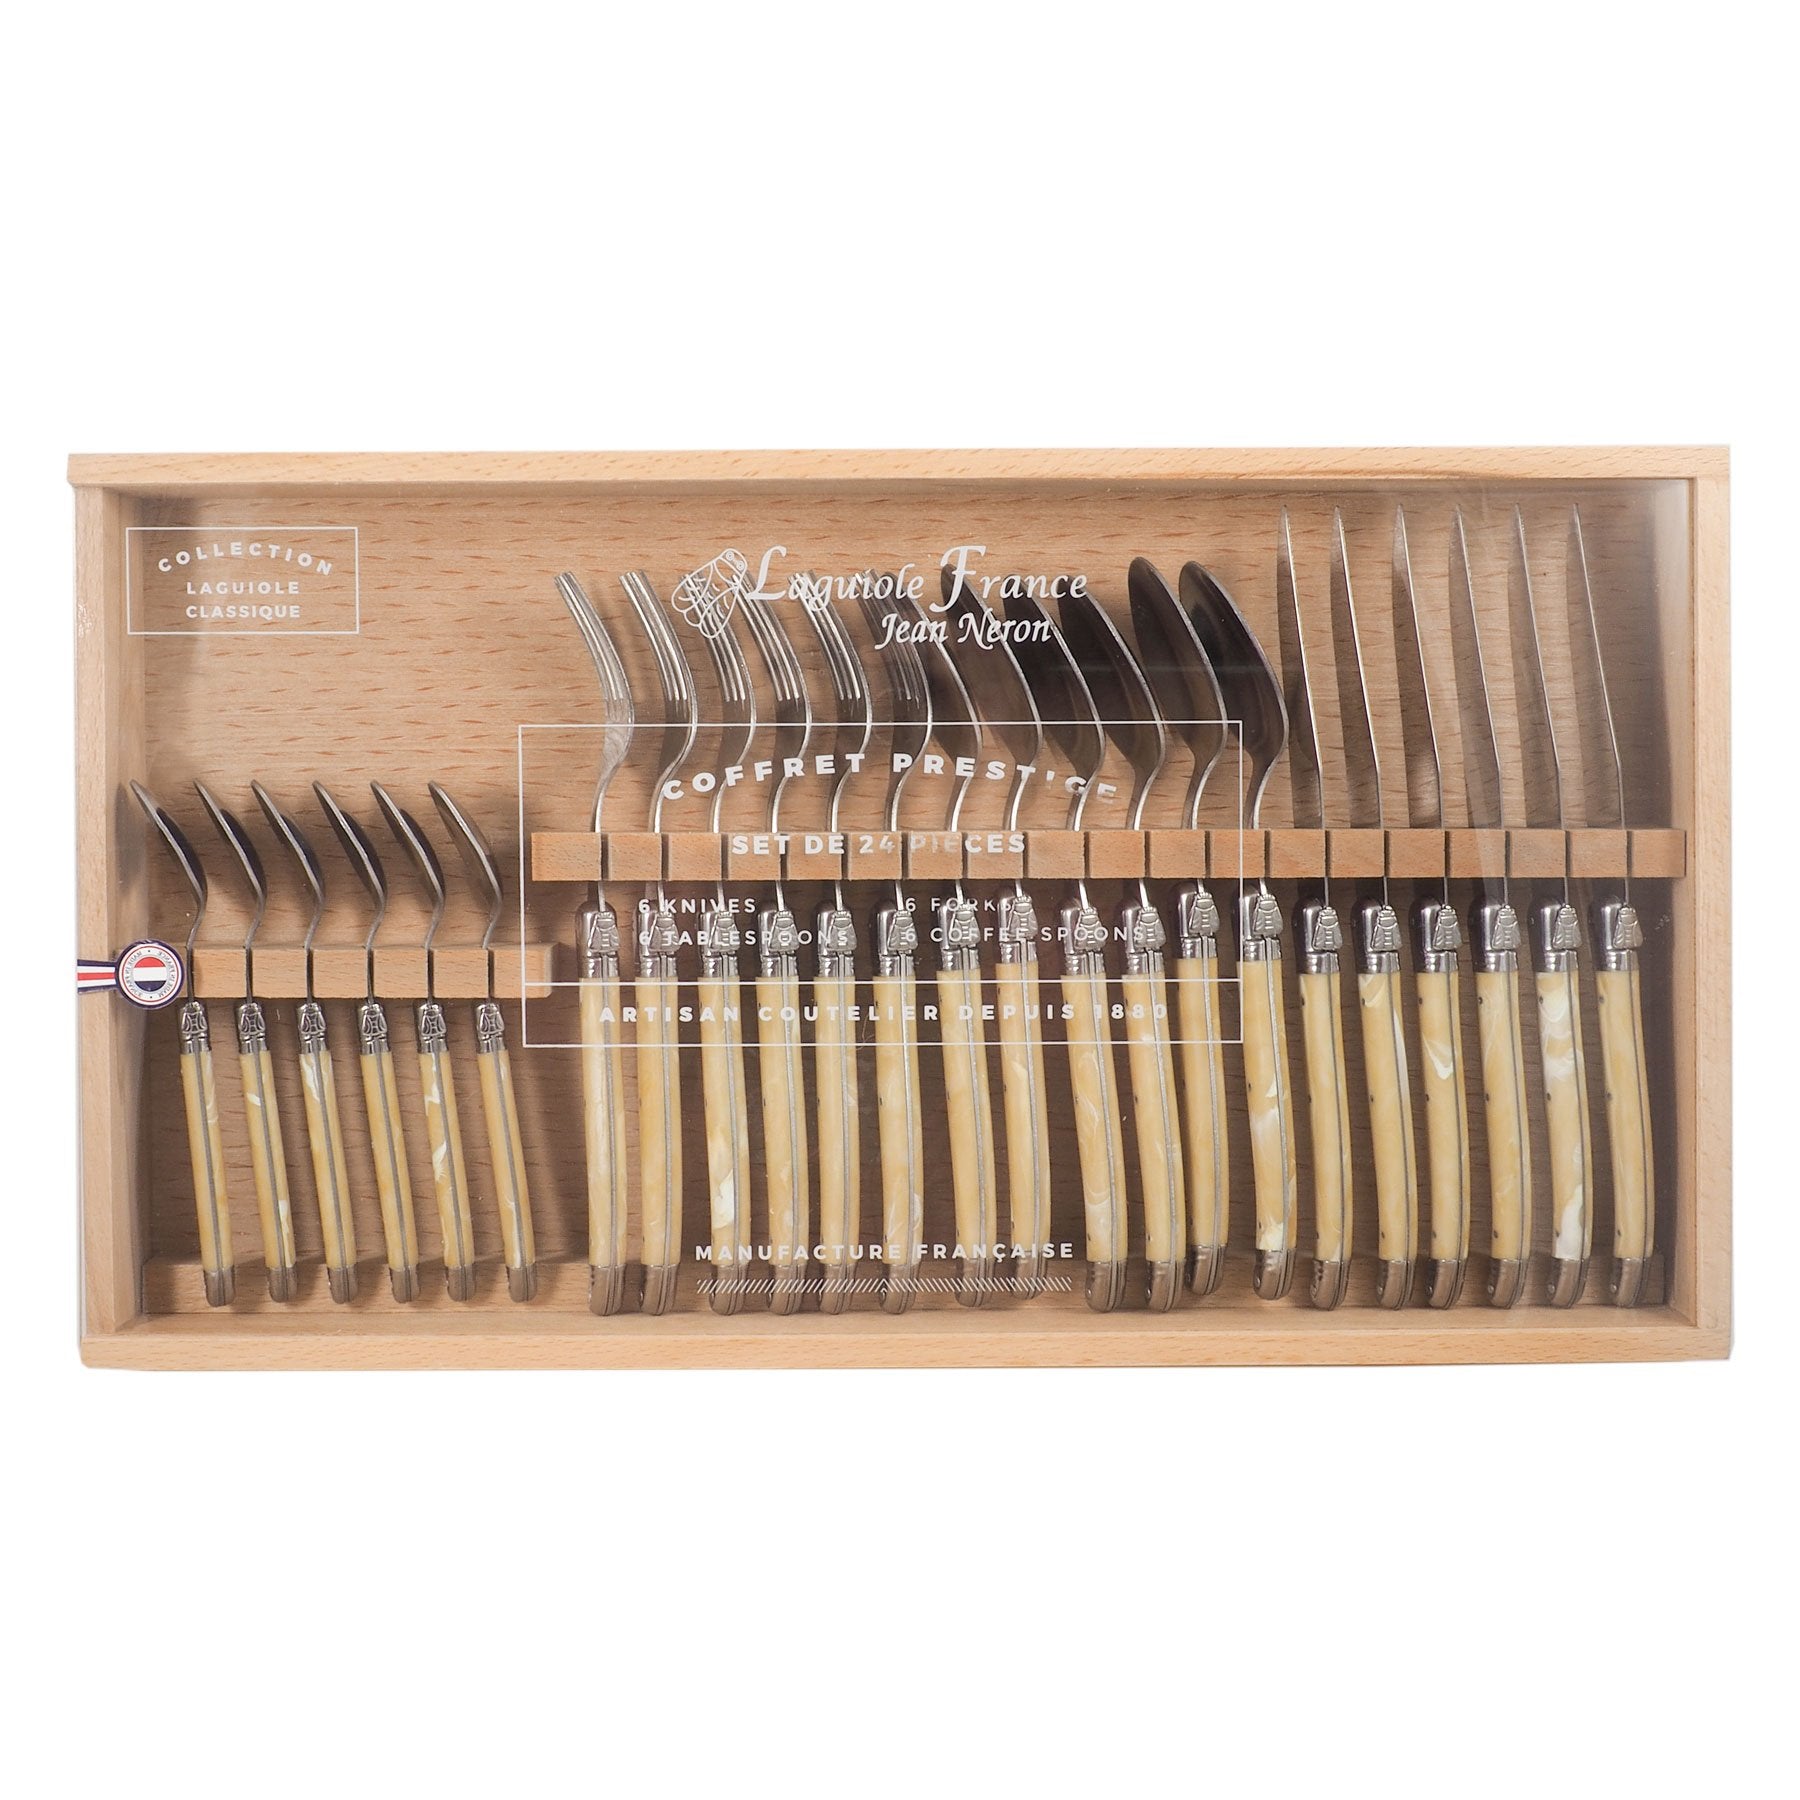 Laguiole 24 Piece Pale Horn Flatware with Wooden Box - French Dry Goods